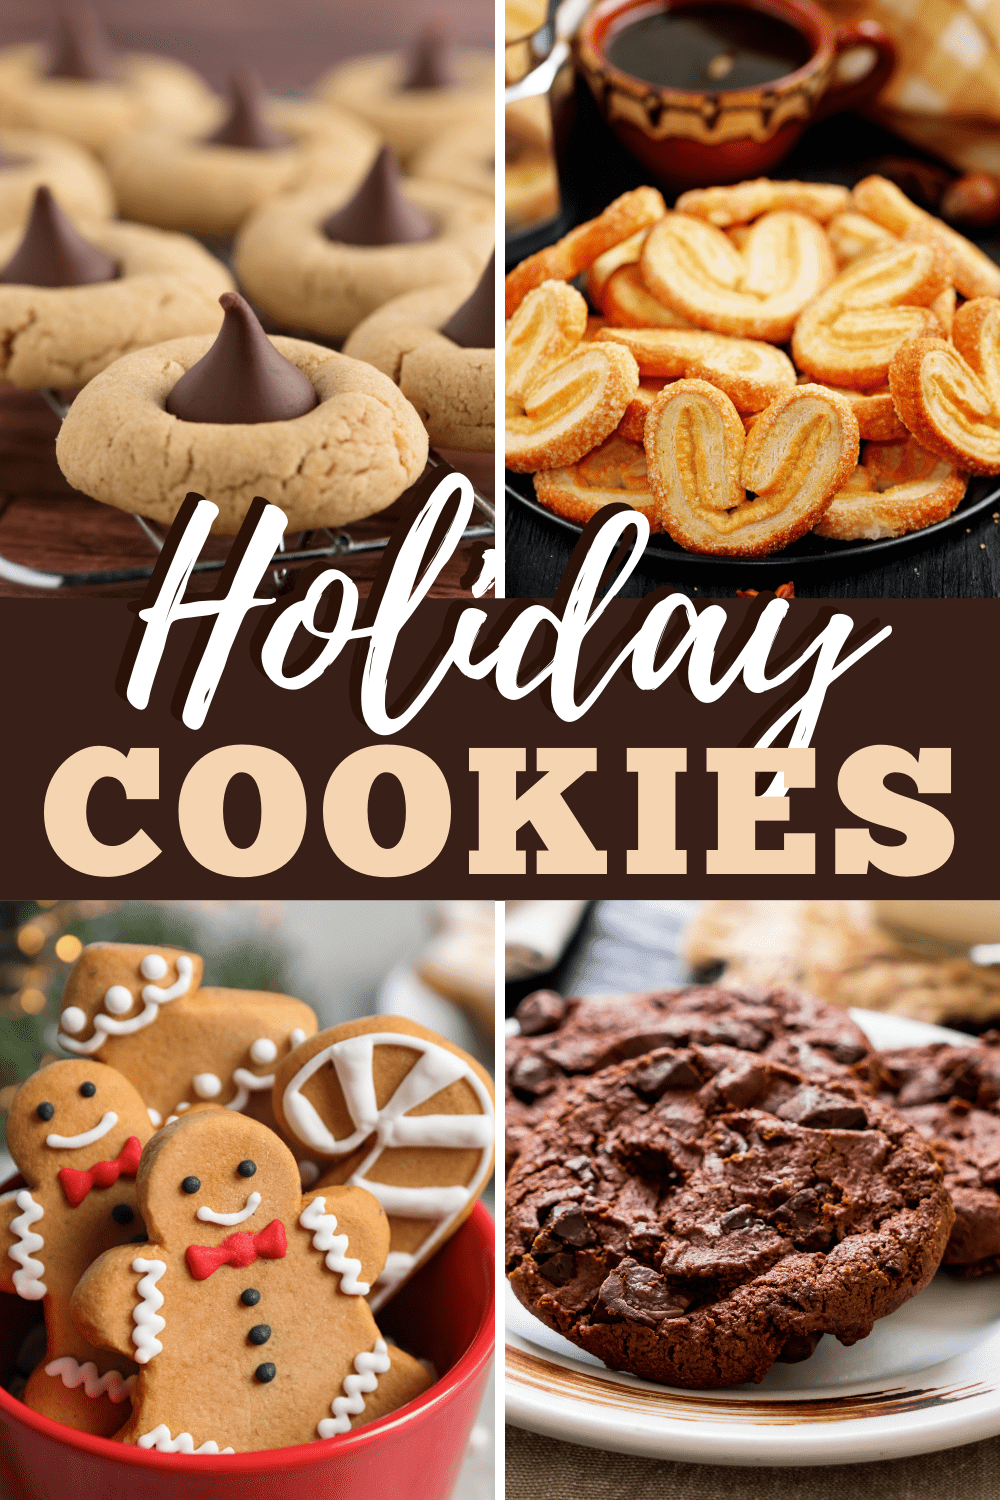 Holiday Cookies 1 